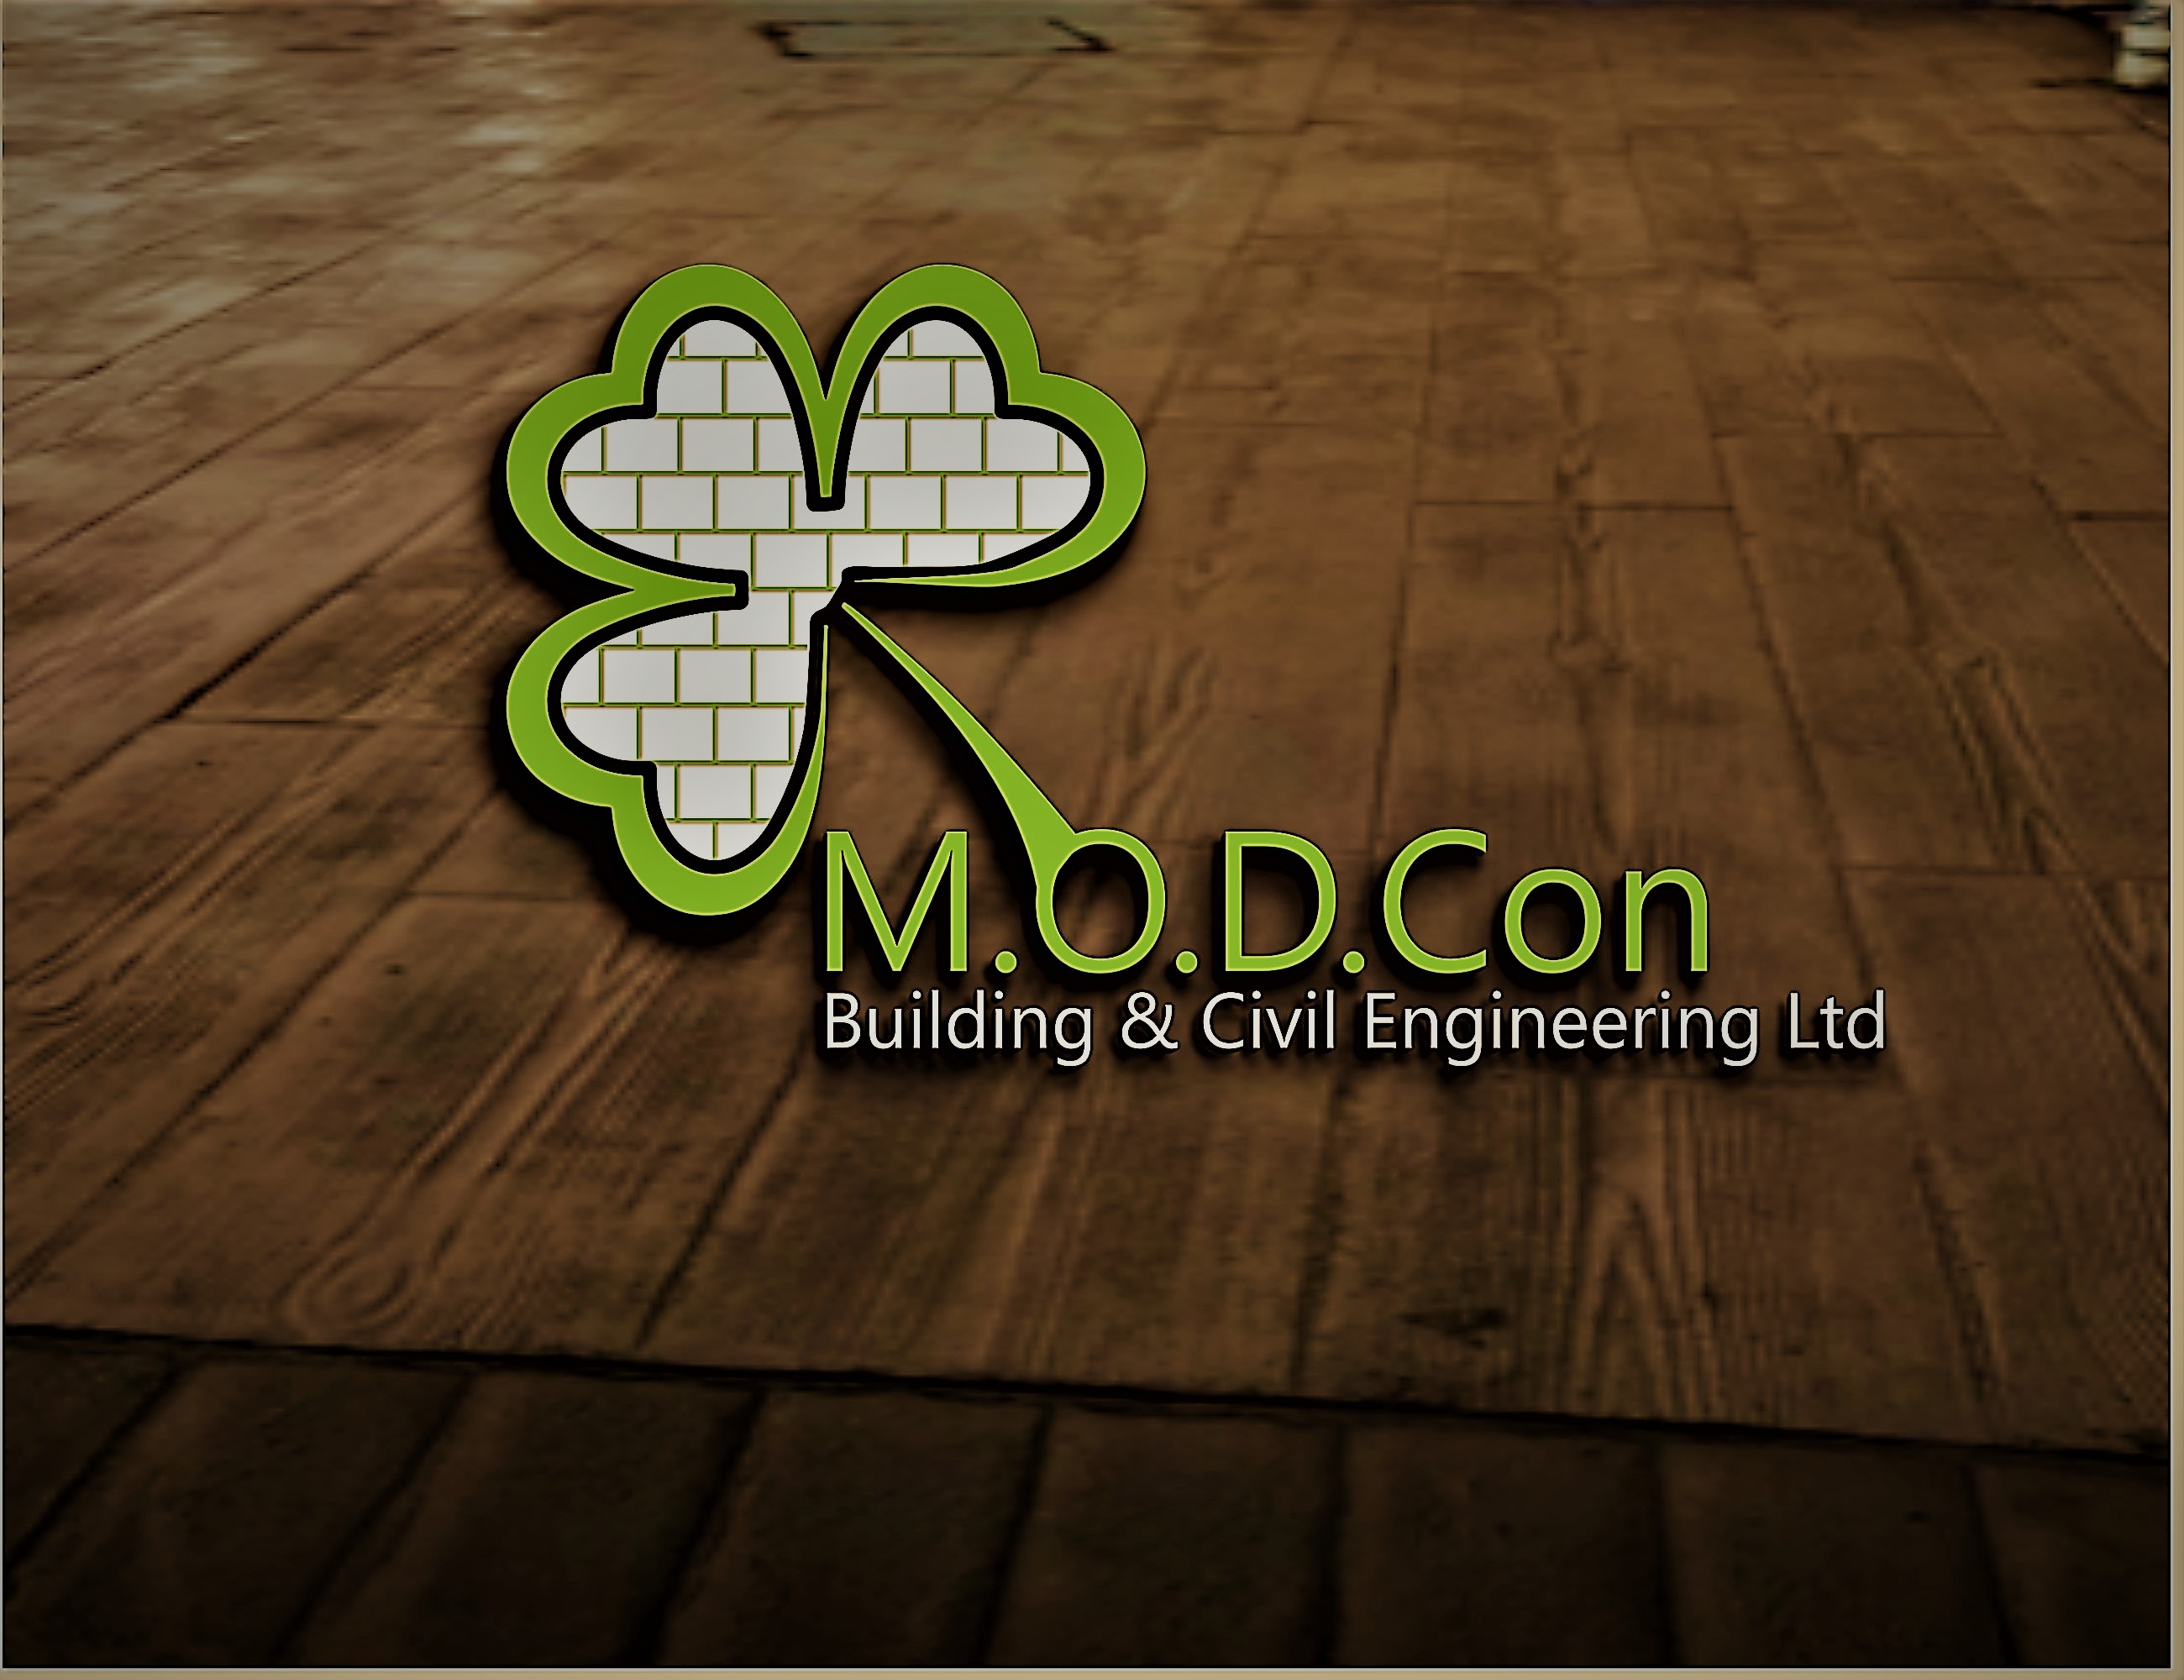 M.O.D.Con Building and Civil Engineering Ltd